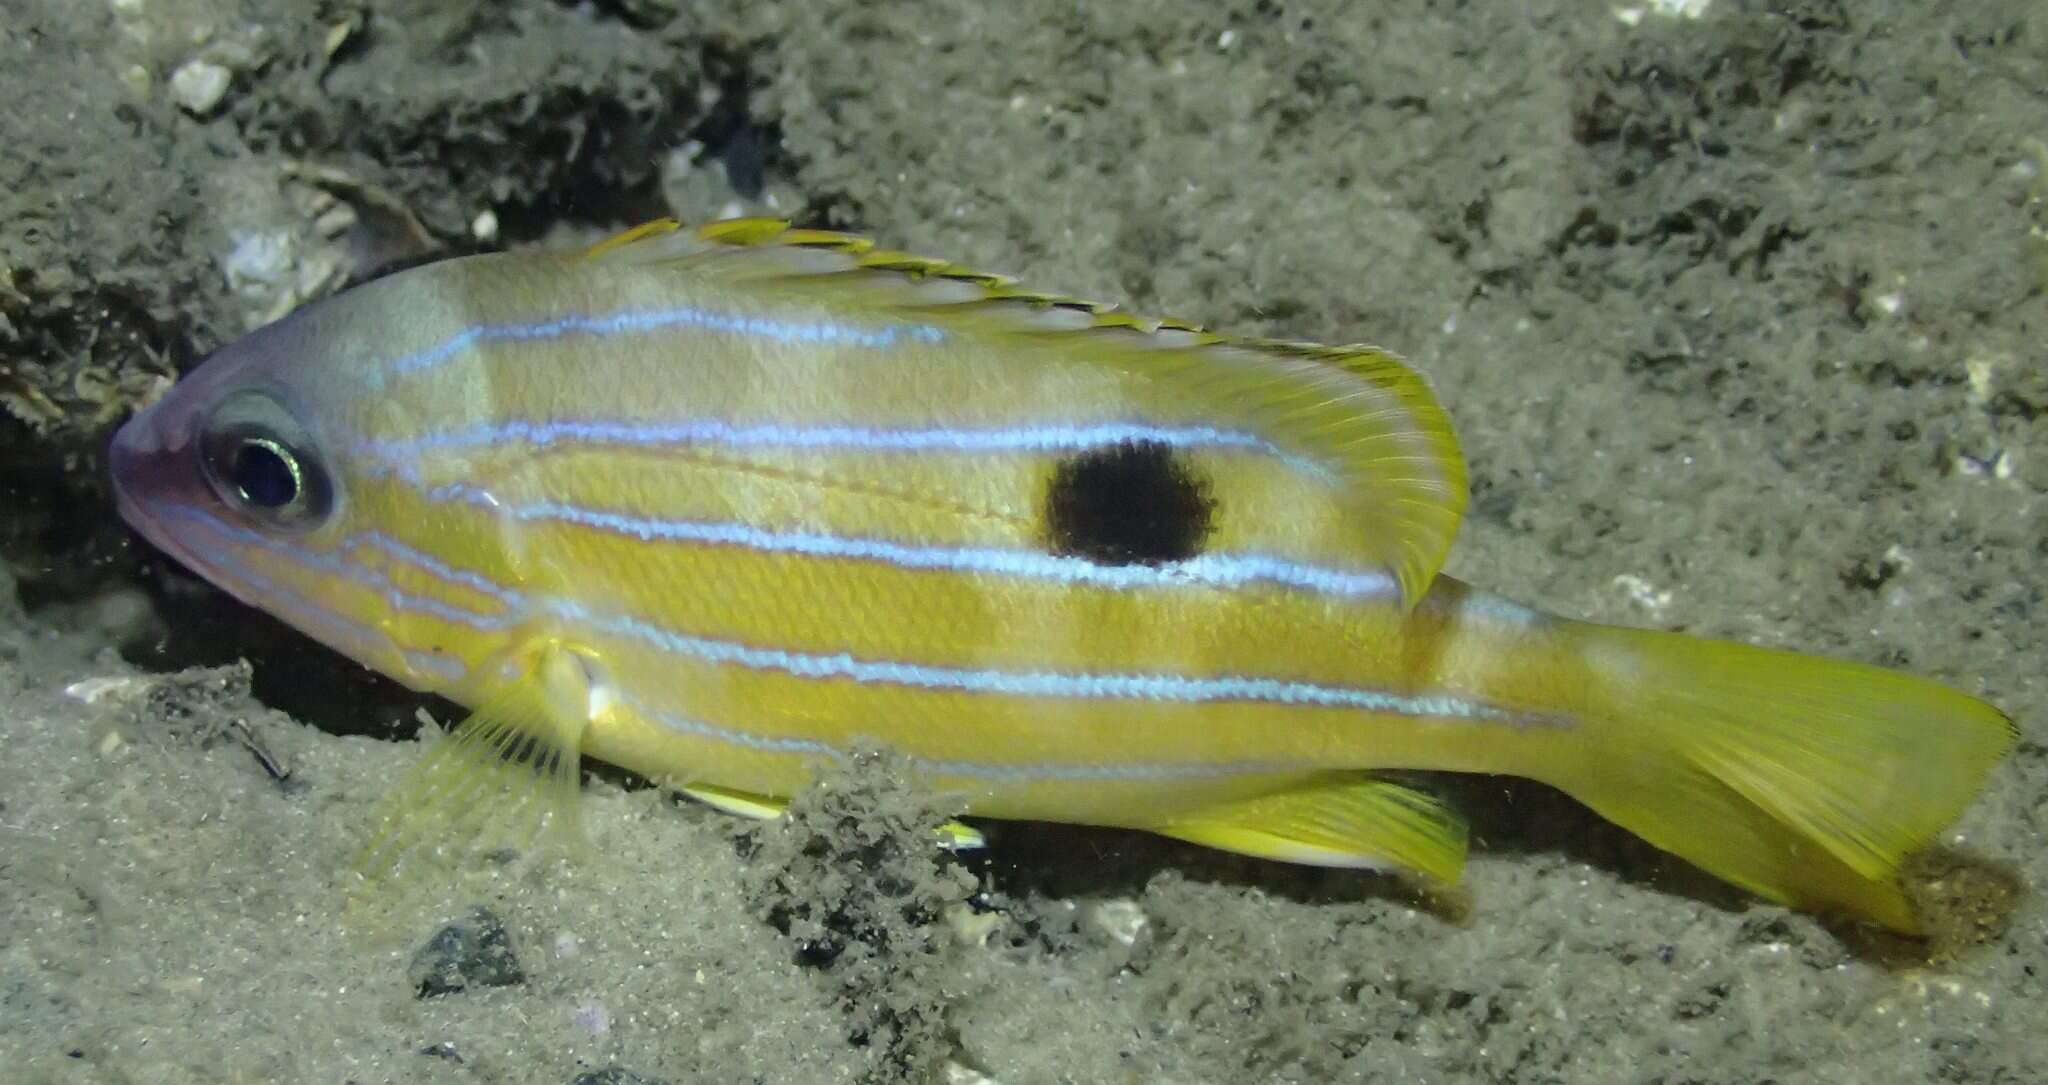 Image of Five-lined snapper